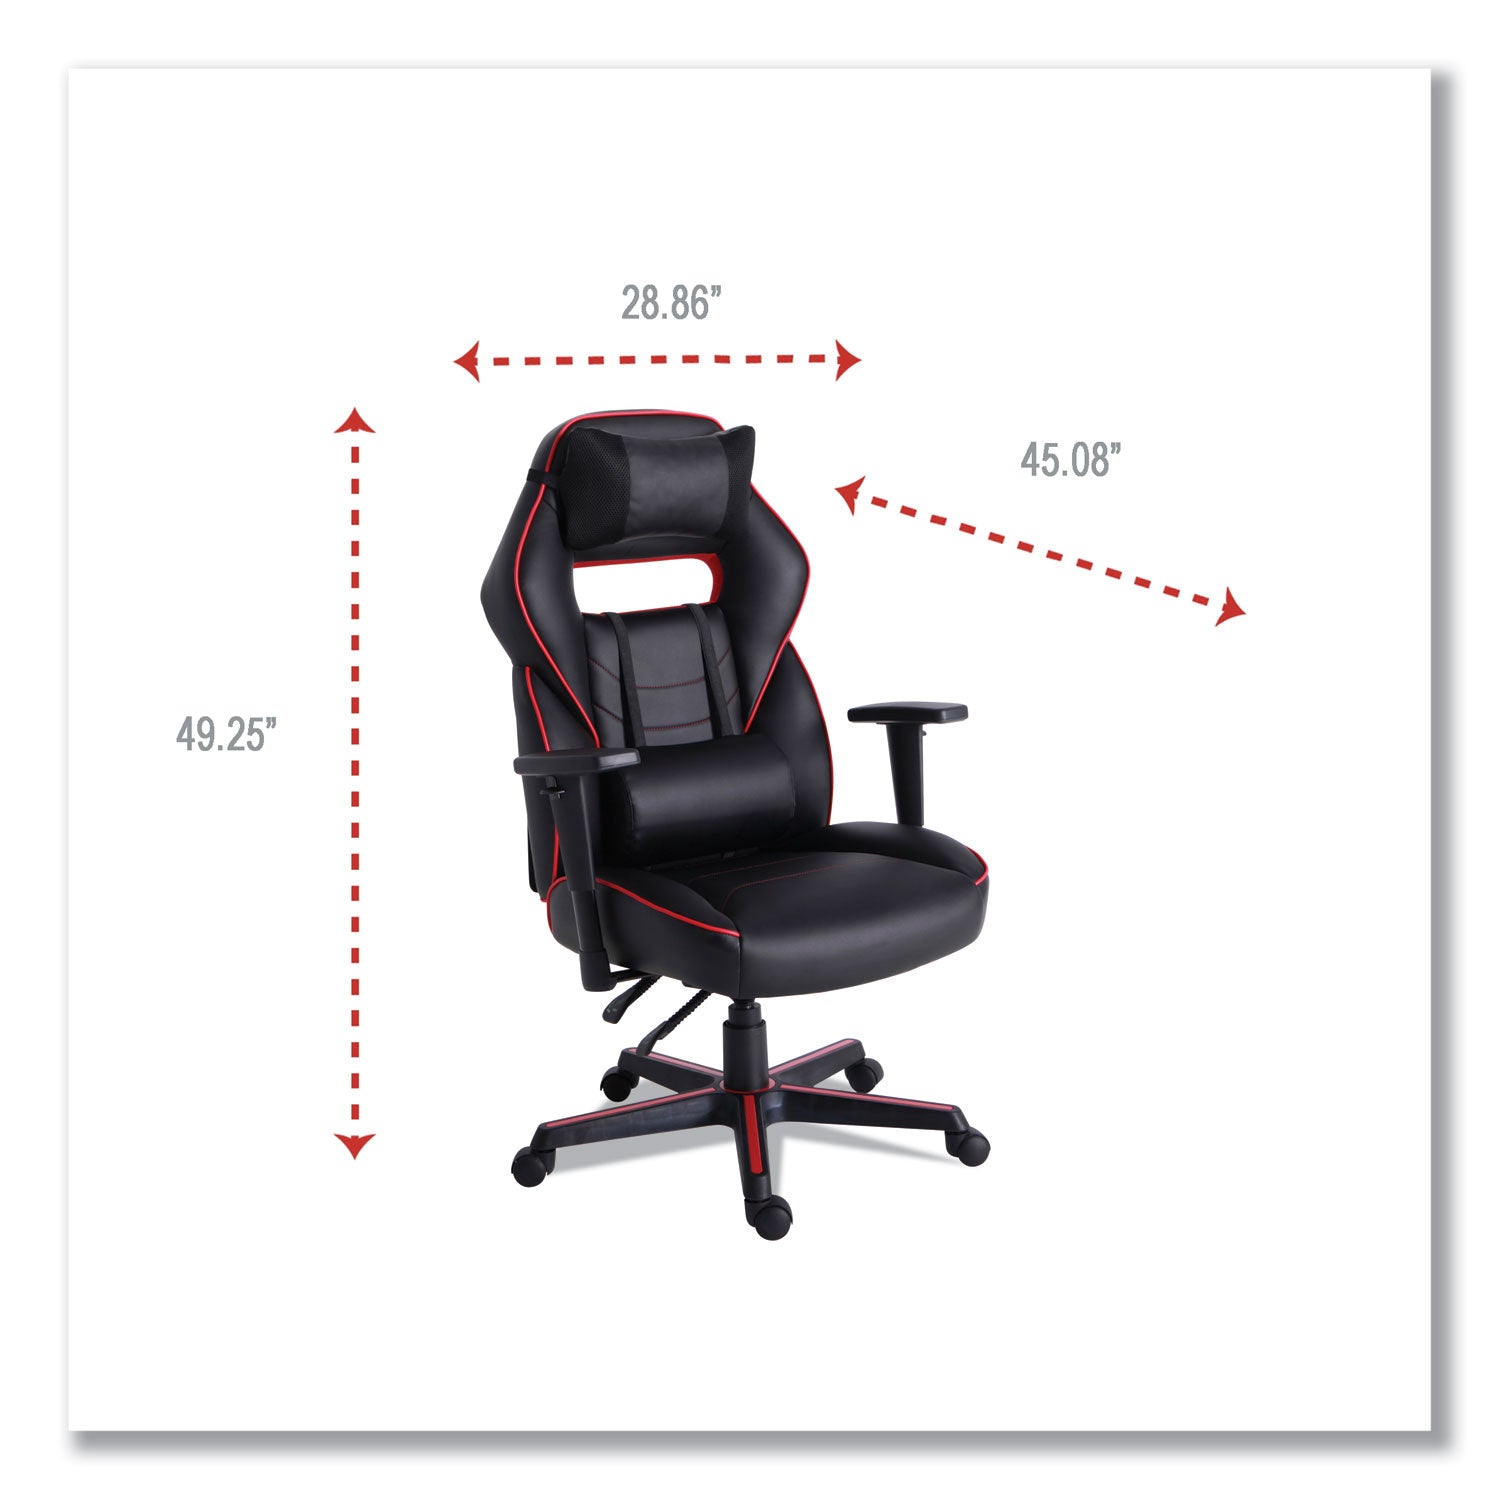 racing-style-ergonomic-gaming-chair-supports-275-lb-1591-to-198-seat-height-black-red-trim-seat-back-black-red-base_alegm4136 - 3